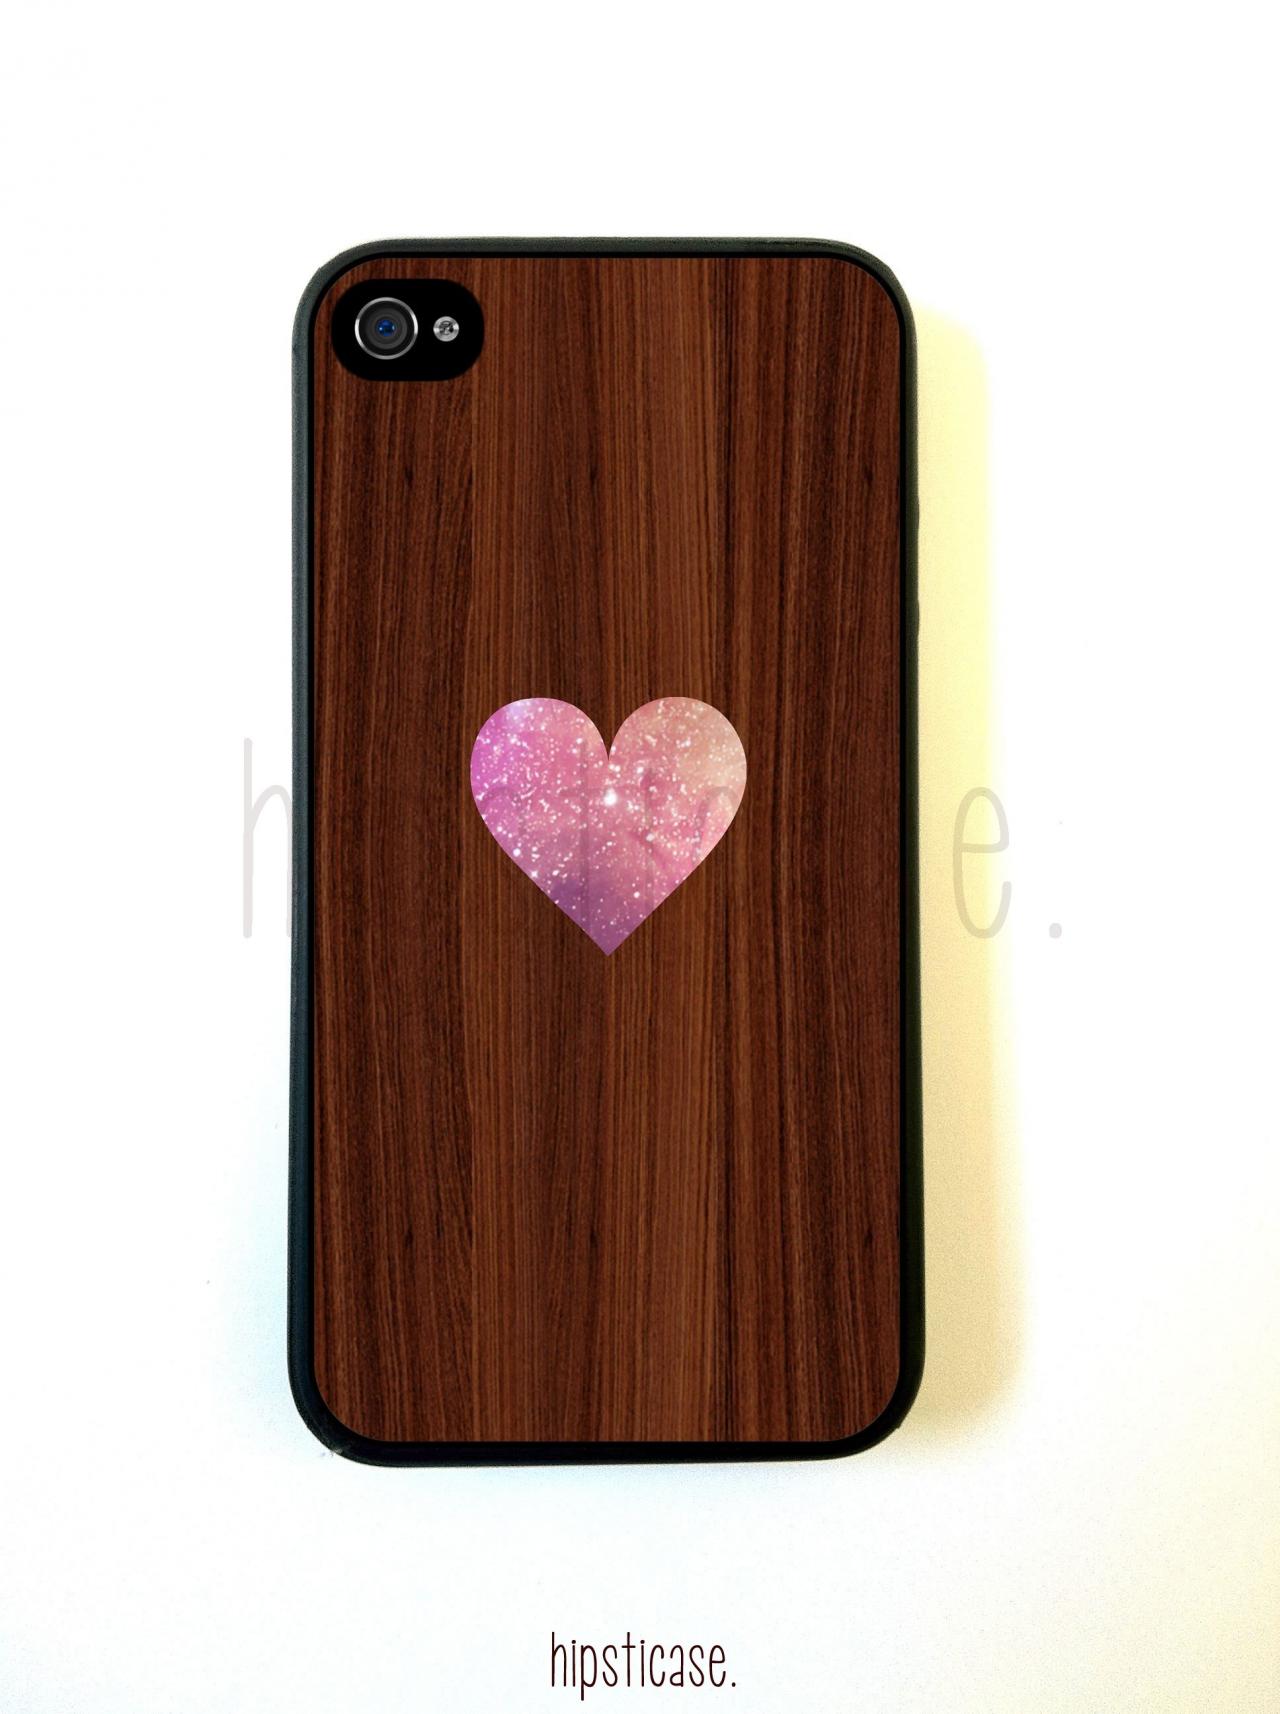 Heart On Wood Iphone 5 Case - For Iphone 5/5g - Designer Tpu Case Verizon At&t Sprint